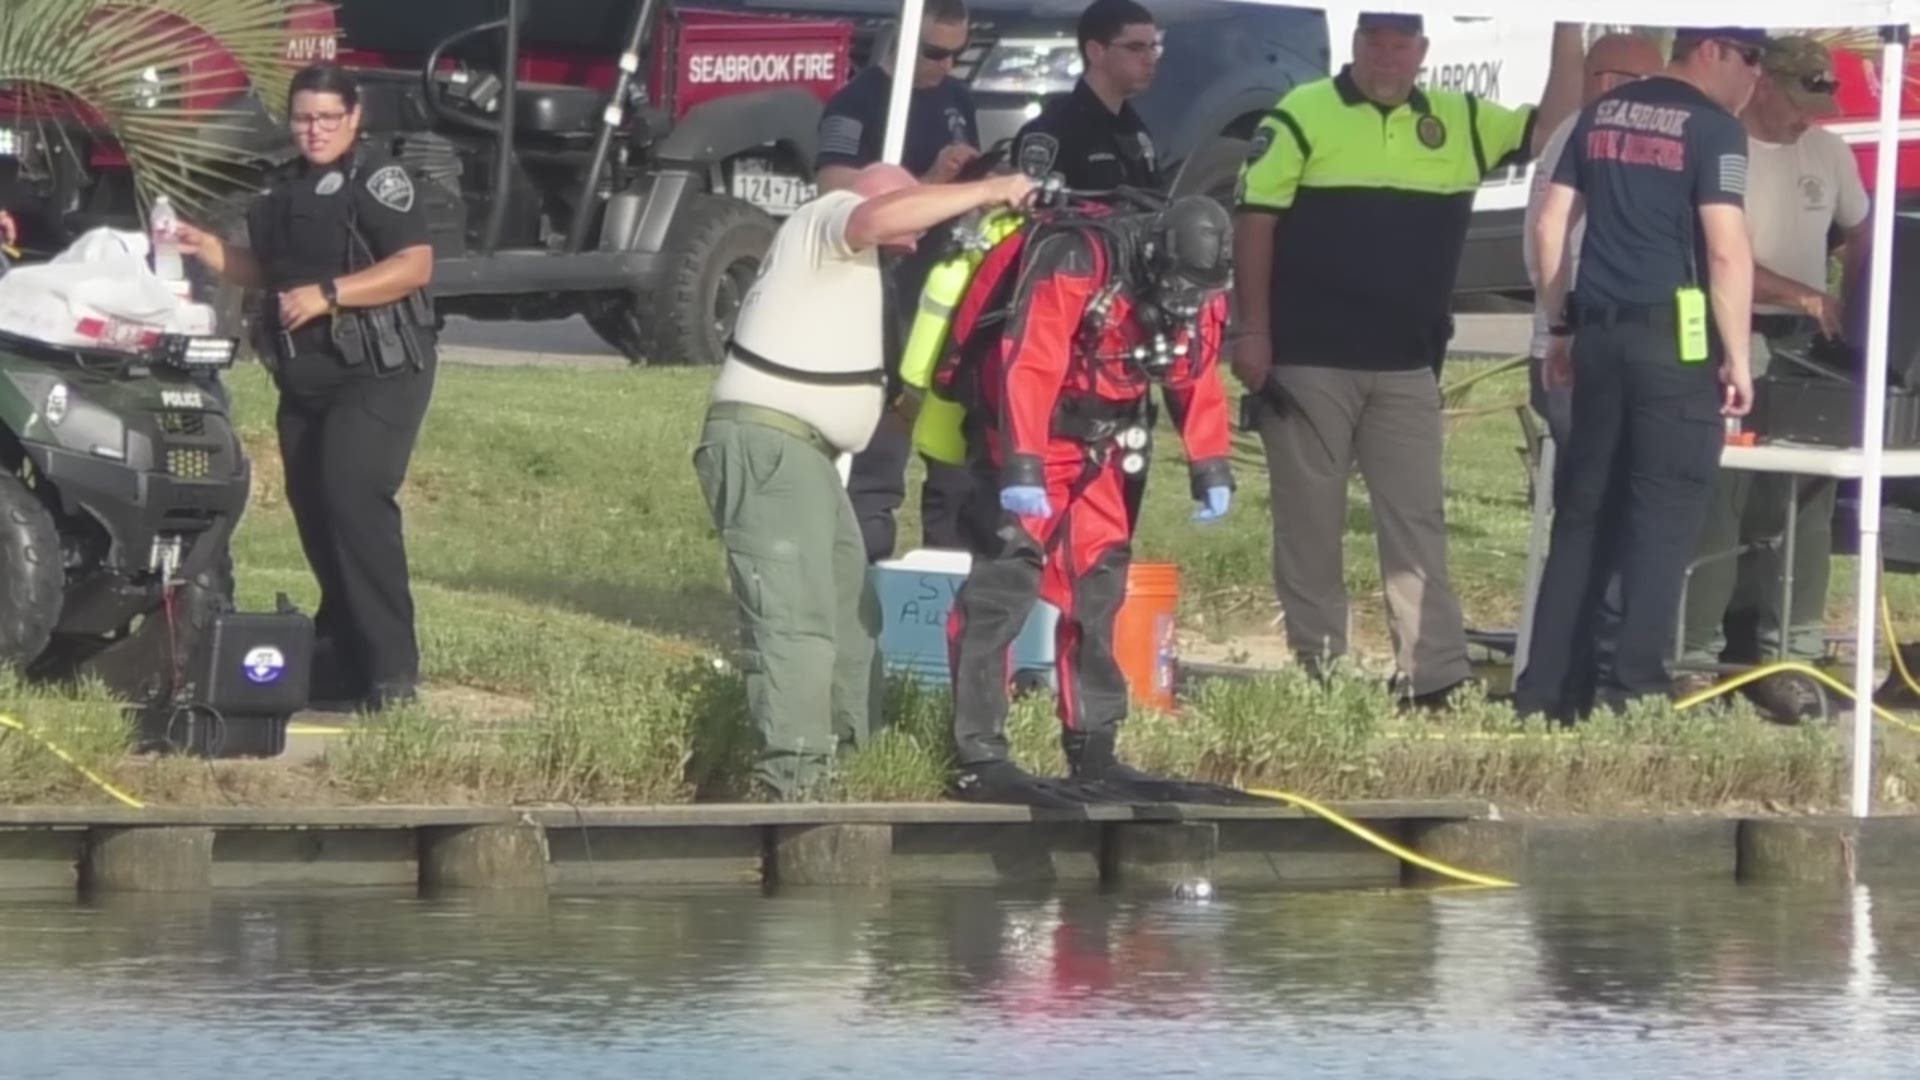 Search crews look for the body of a man who drowned while fishing with his son in Seabrook early Saturday morning.